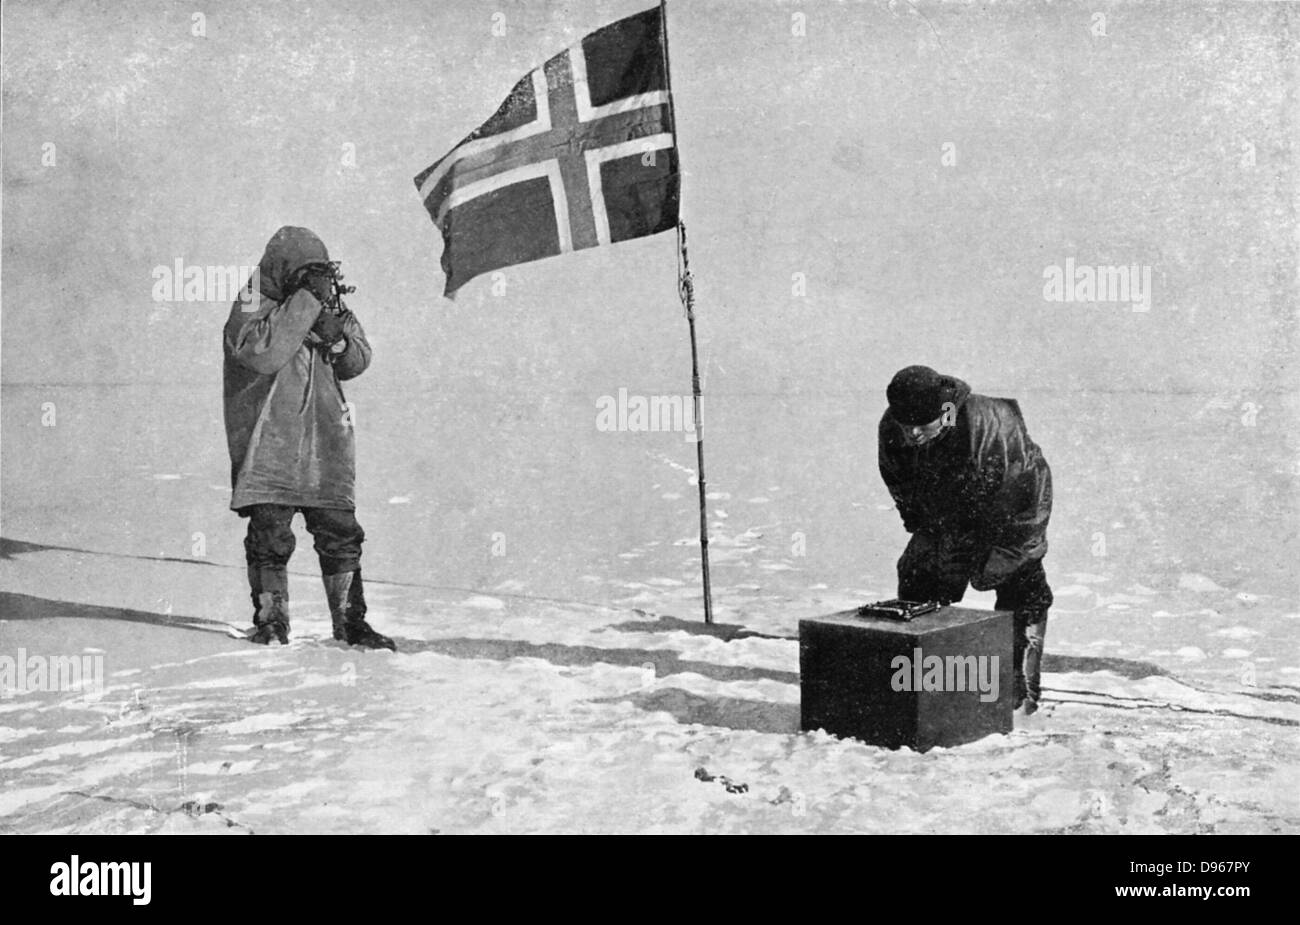 Raold Engelbrecht Gravning Amundsen (1872-1928). Norwegian explorer. First to navigate the Northwest Passage (1918) Taking sights at South Pole which he reached in December 1911, one month before Scott Stock Photo